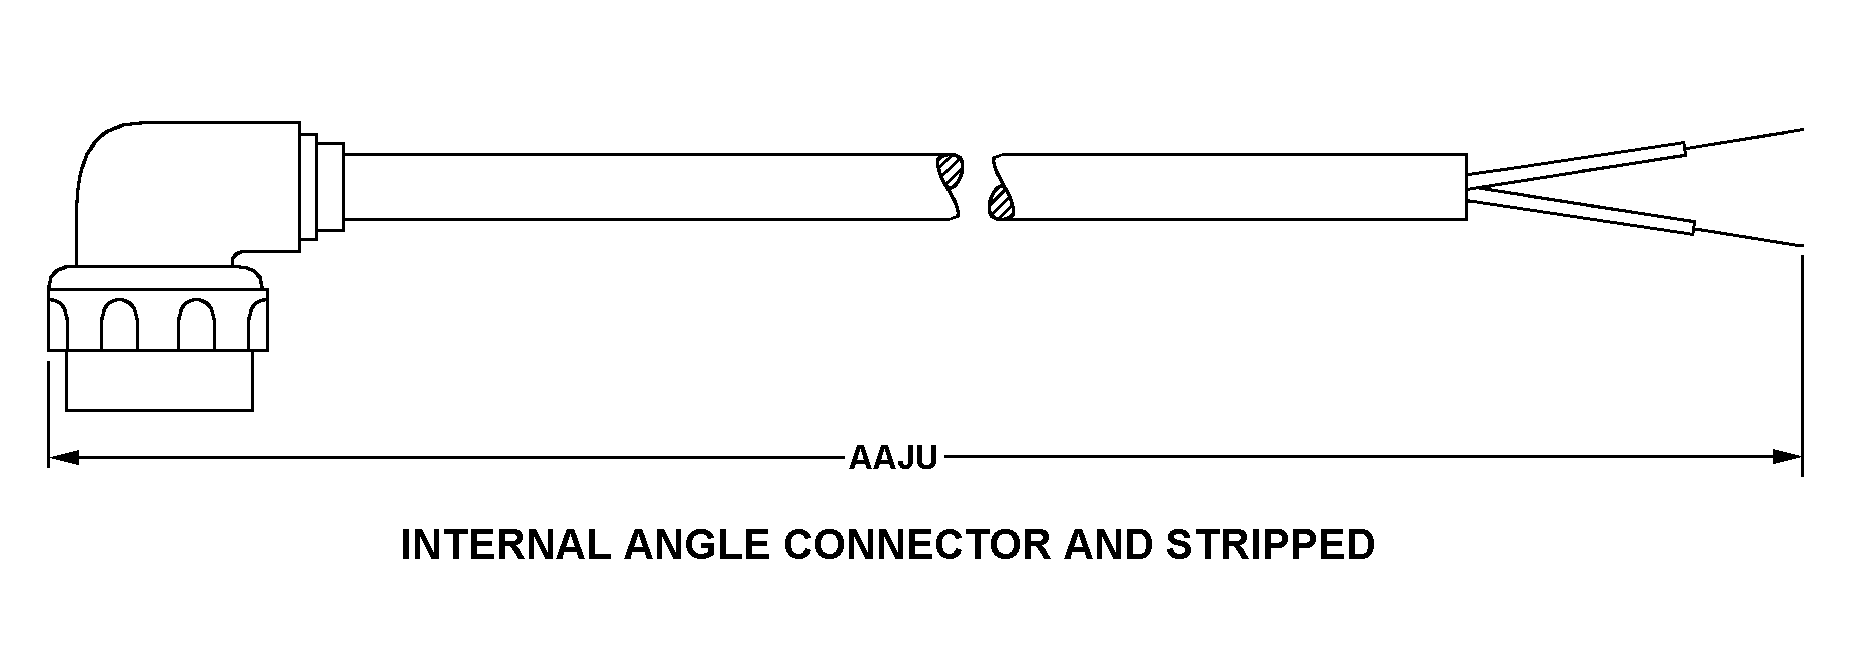 INTERNAL ANGLE CONNECTOR AND STRIPPED style nsn 5995-01-408-3954